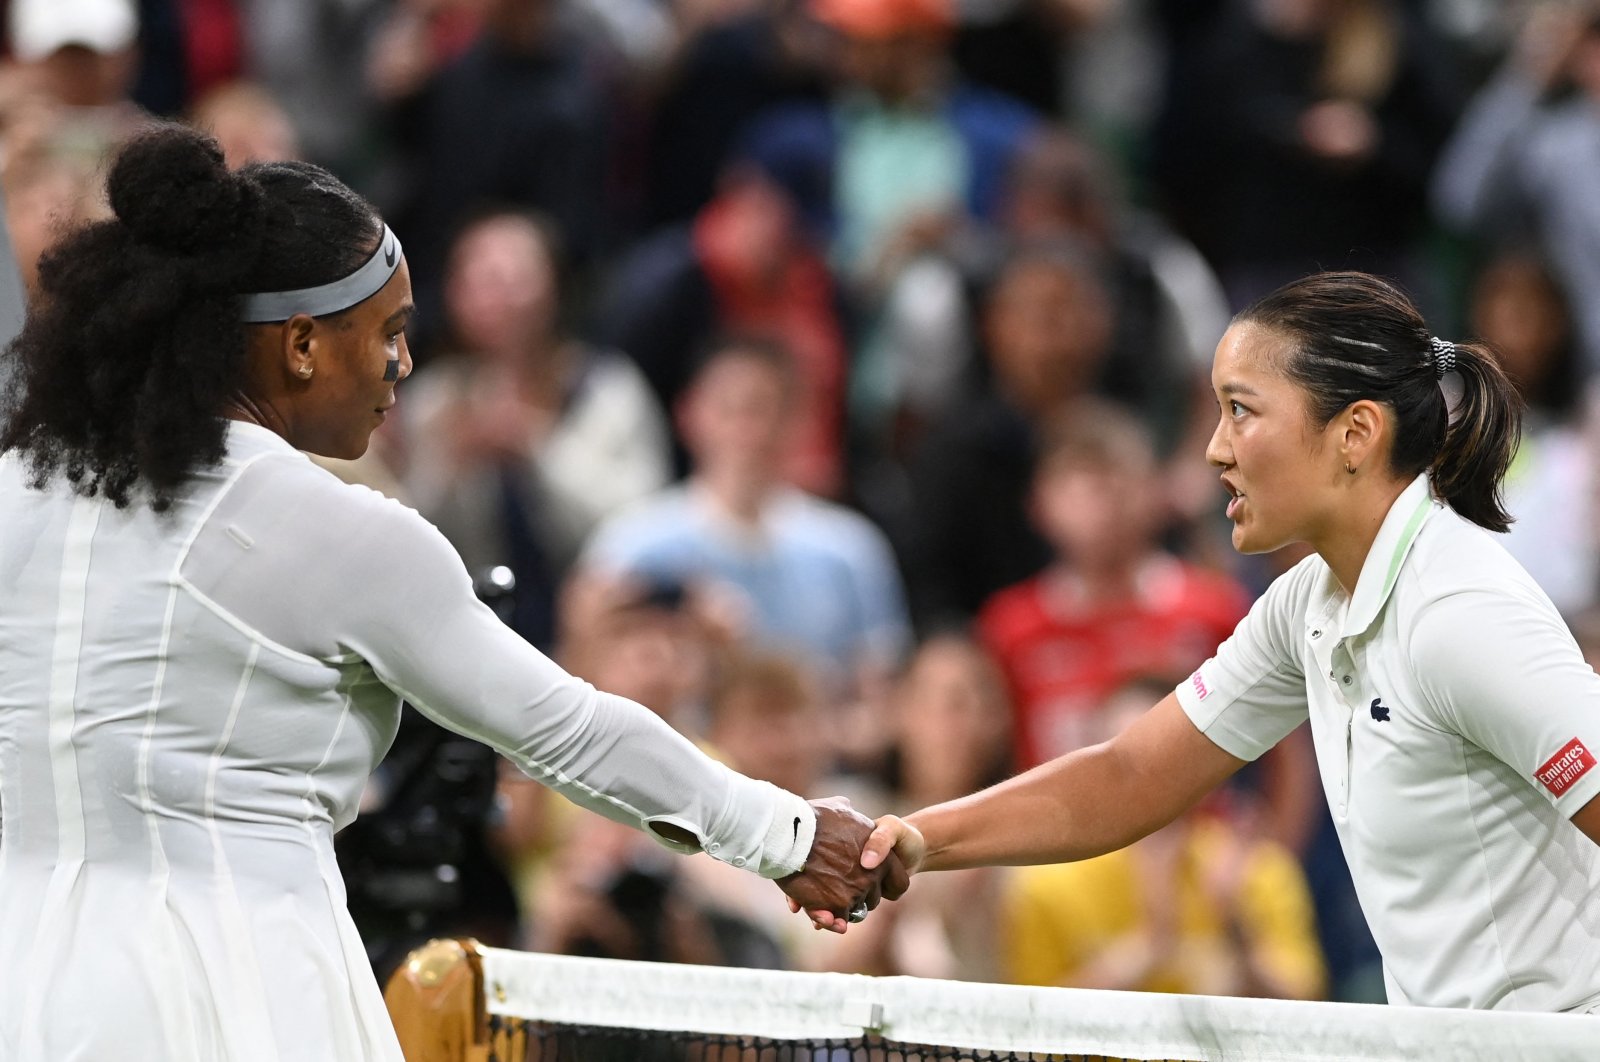 France&#039;s Harmony Tan (R) shakes hands with U.S.&#039; Serena Williams after winning their Wimbledon Championships women&#039;s singles match, London, England, June 28, 2022. (AFP Photo)